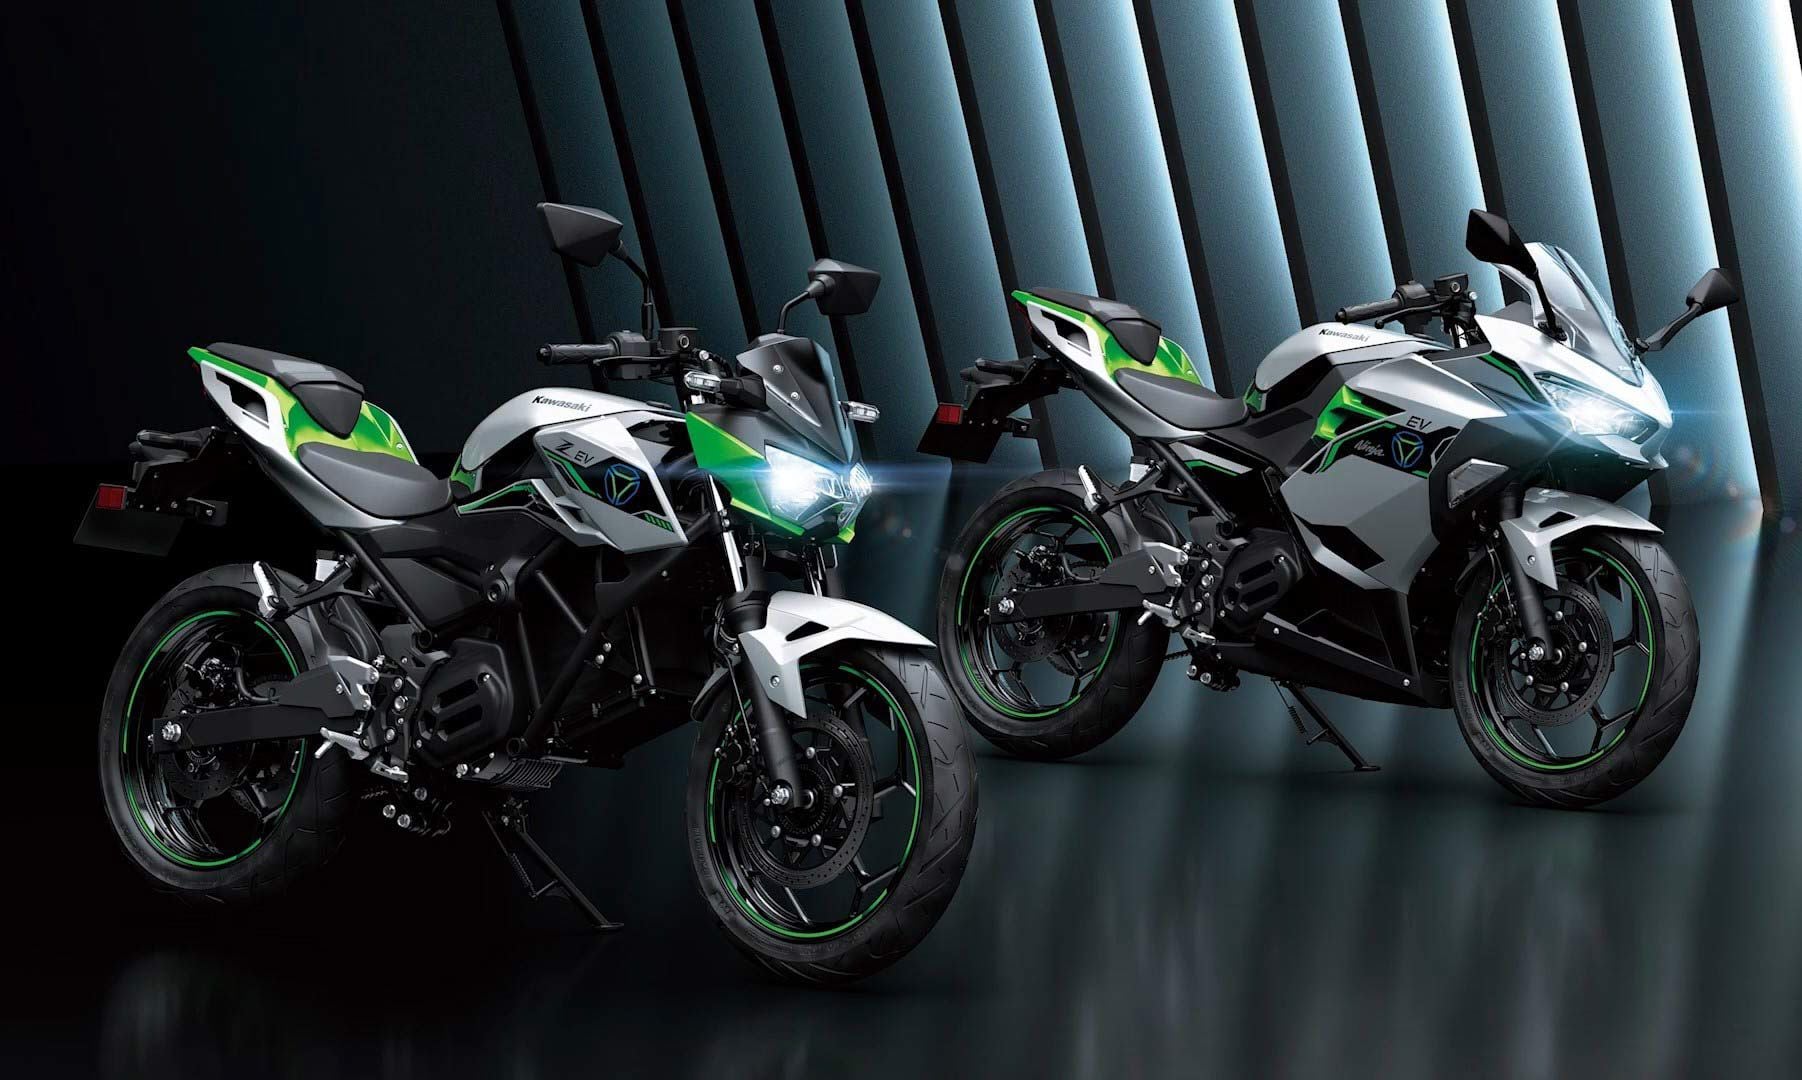 Kawasaki’s two electric motorcycles in naked-Z styling and faired-Ninja styling will go on sale in 2023.